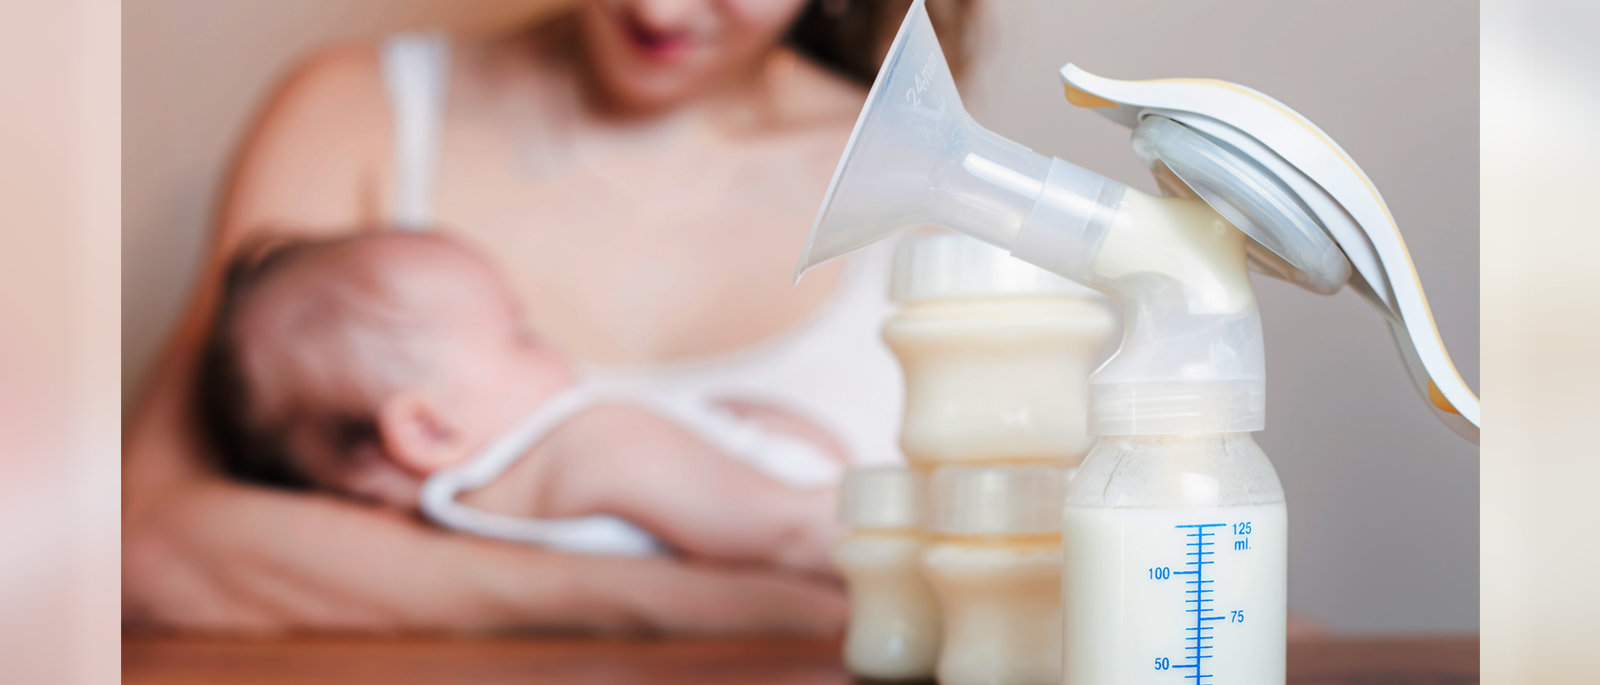 a breast pump with bottles of breast milk on a table in the foreground, and a young woman cradling a baby in her arms in the background